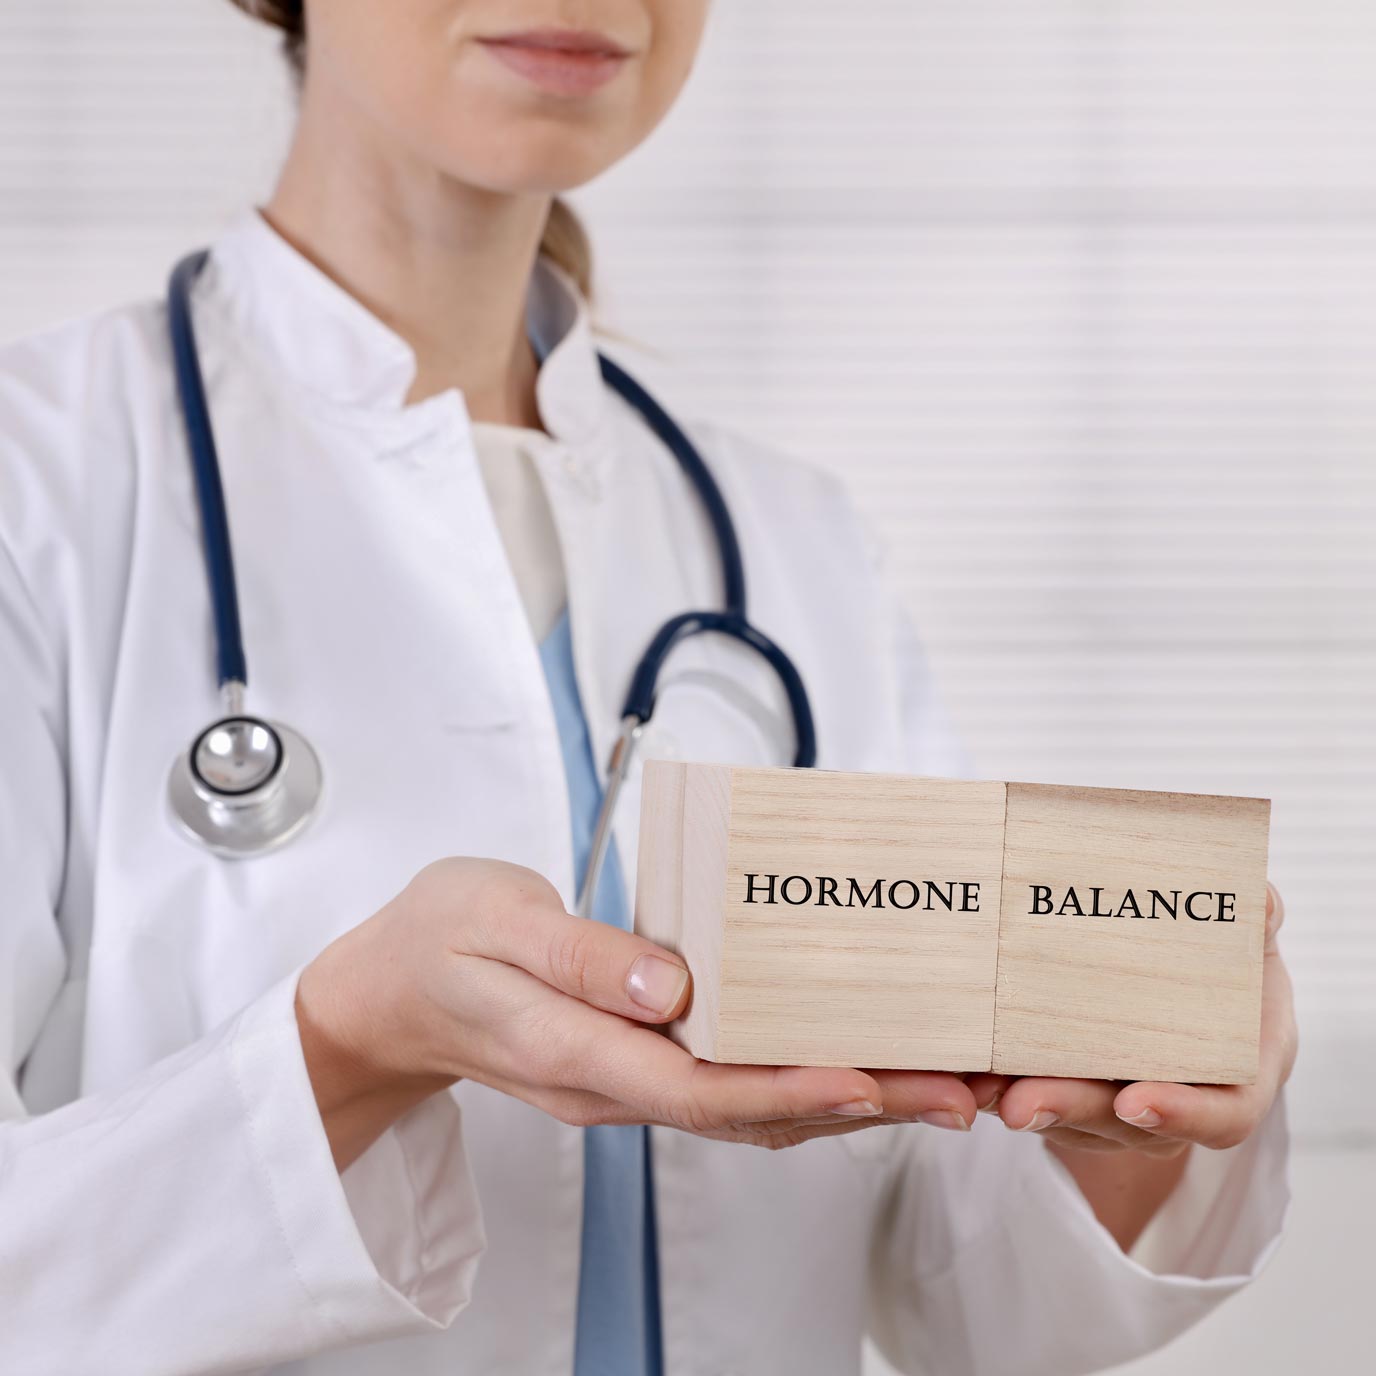 Read about eight lifestyle changes that you can make for better hormone balancing